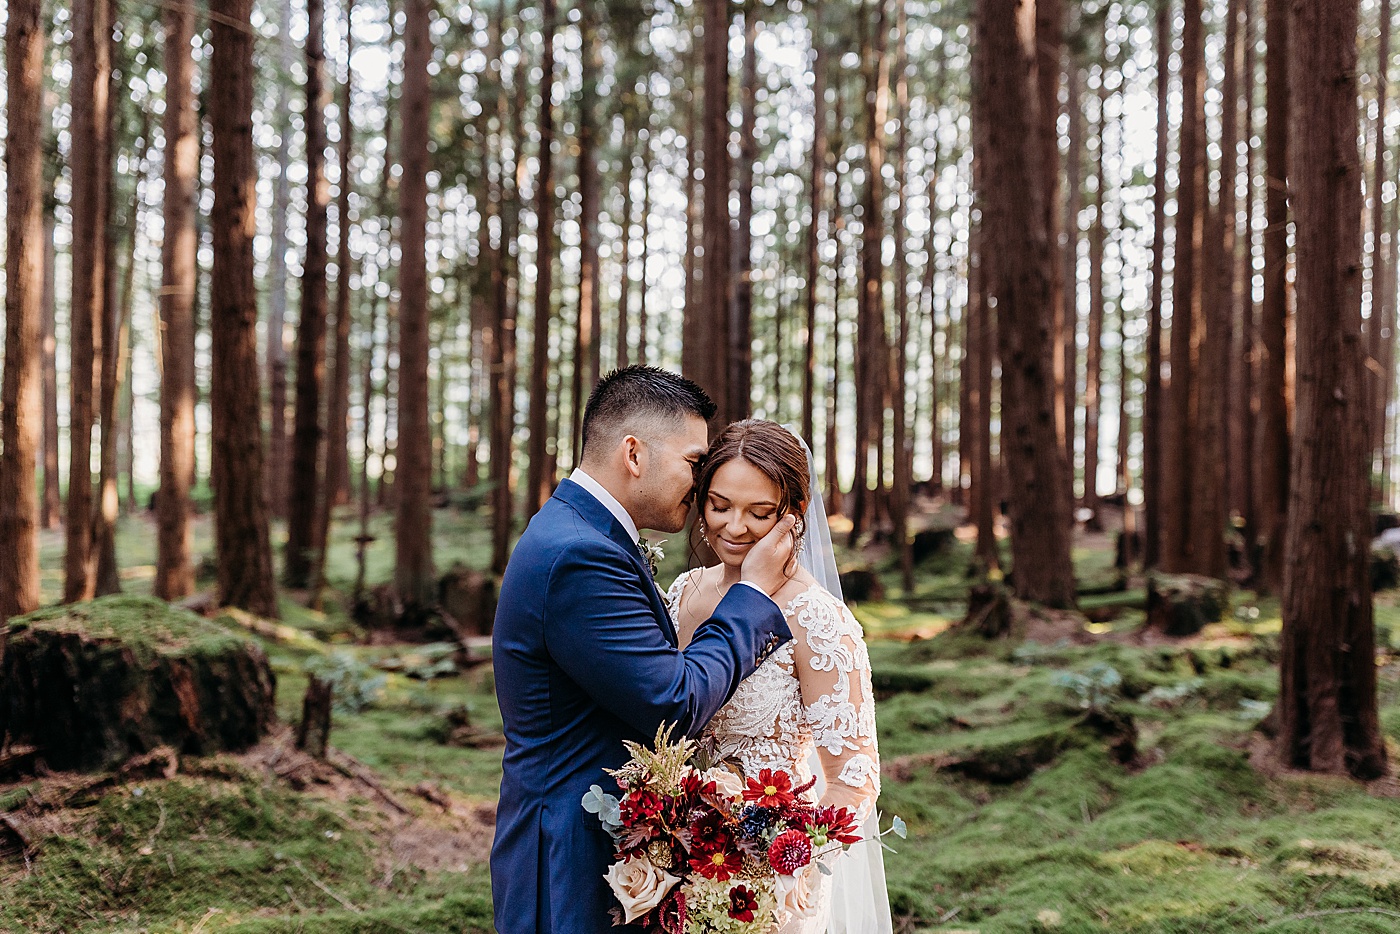 Bride and groom portraits at Emerald Forest Treehouse | Photo by Megan Montalvo Photography